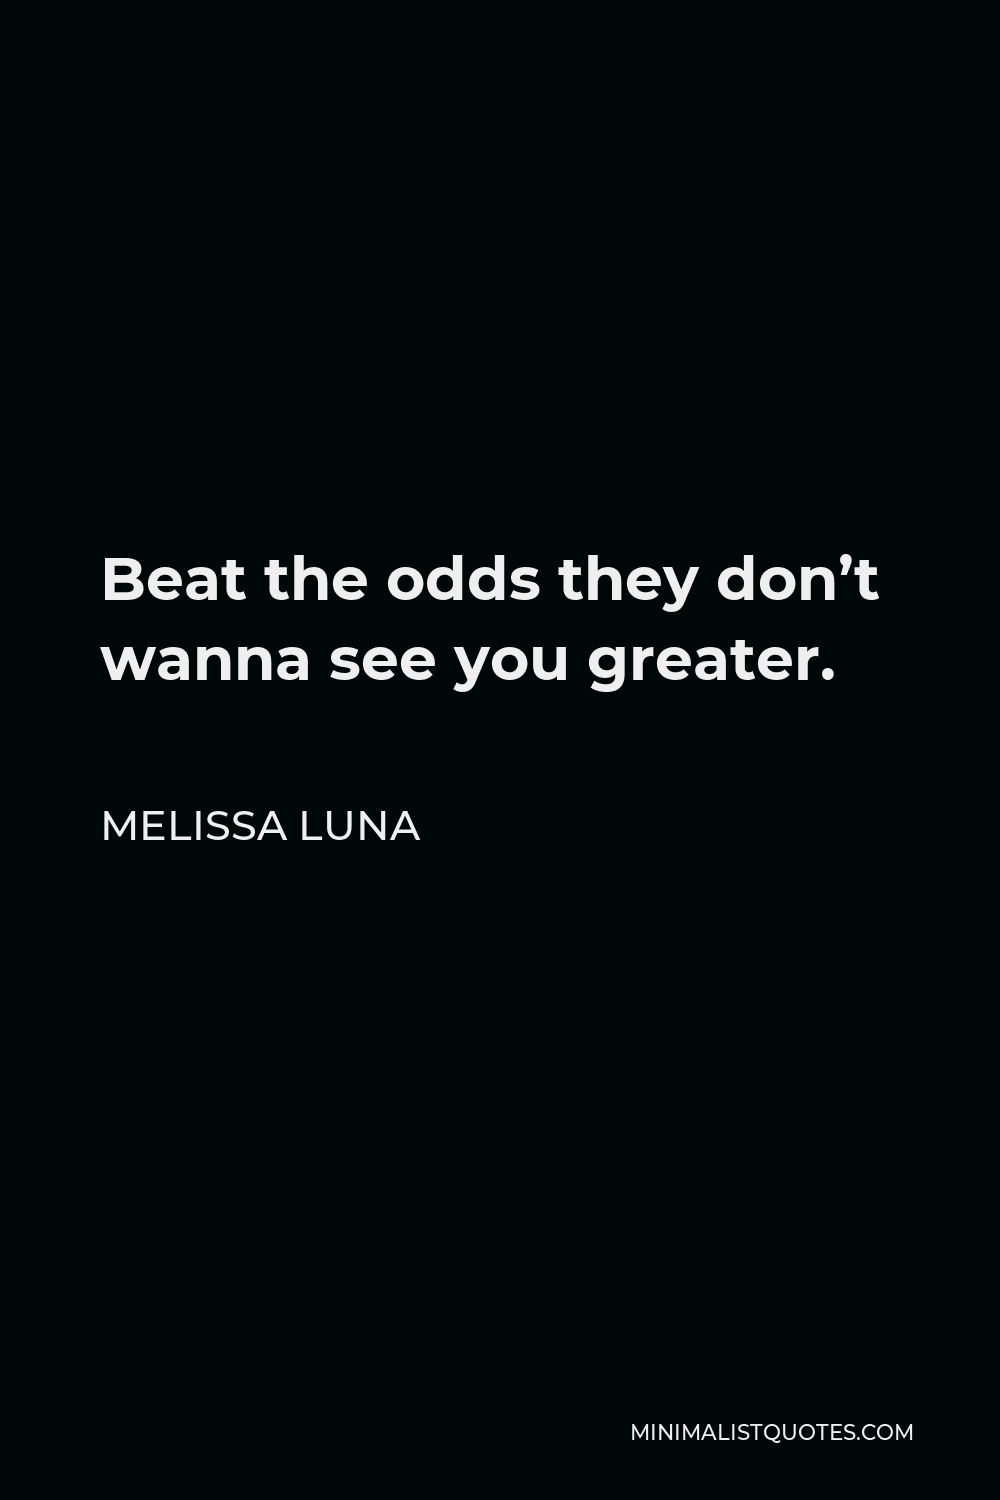 Melissa Luna Quote - Beat the odds they don’t wanna see you greater.